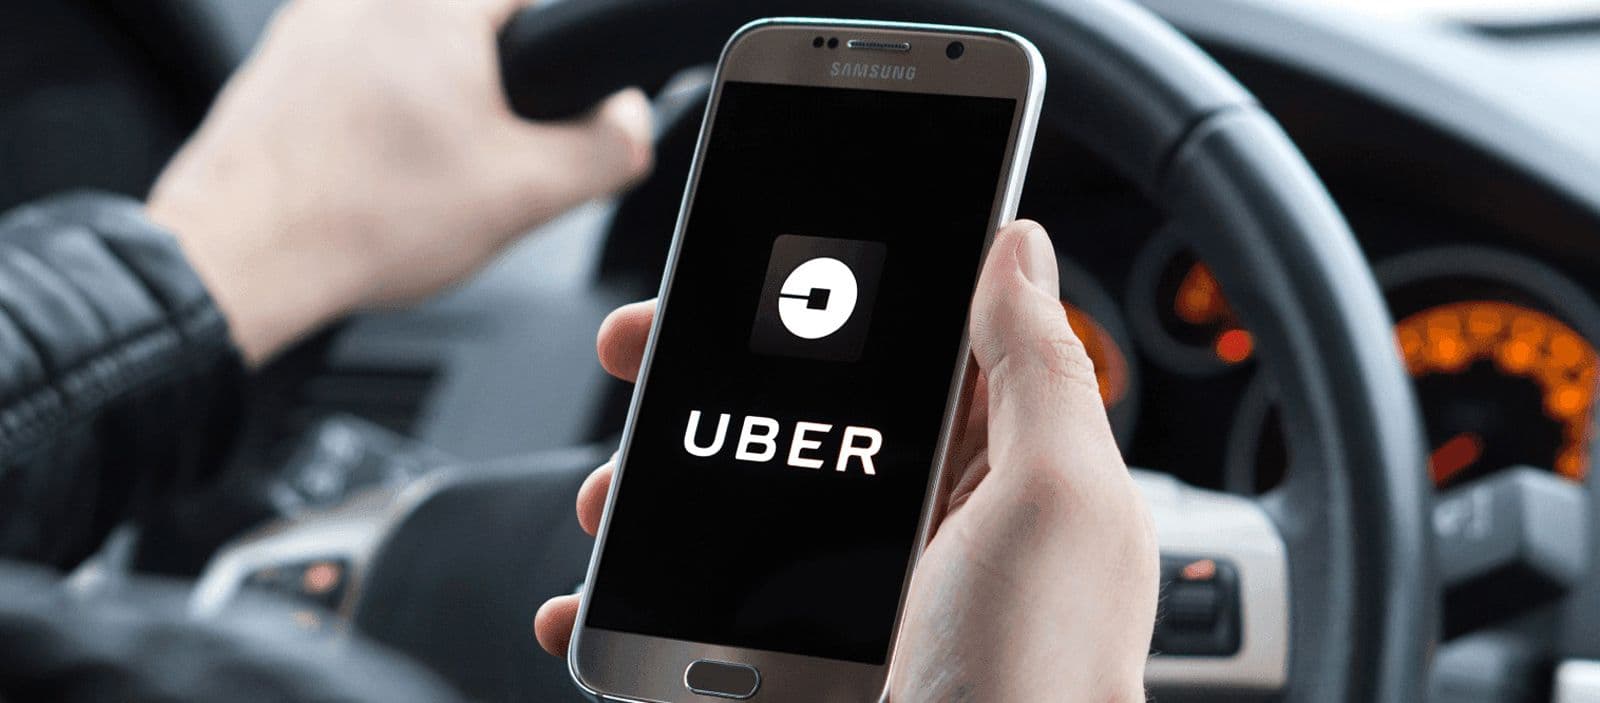 Uber comfort: %5 income boost